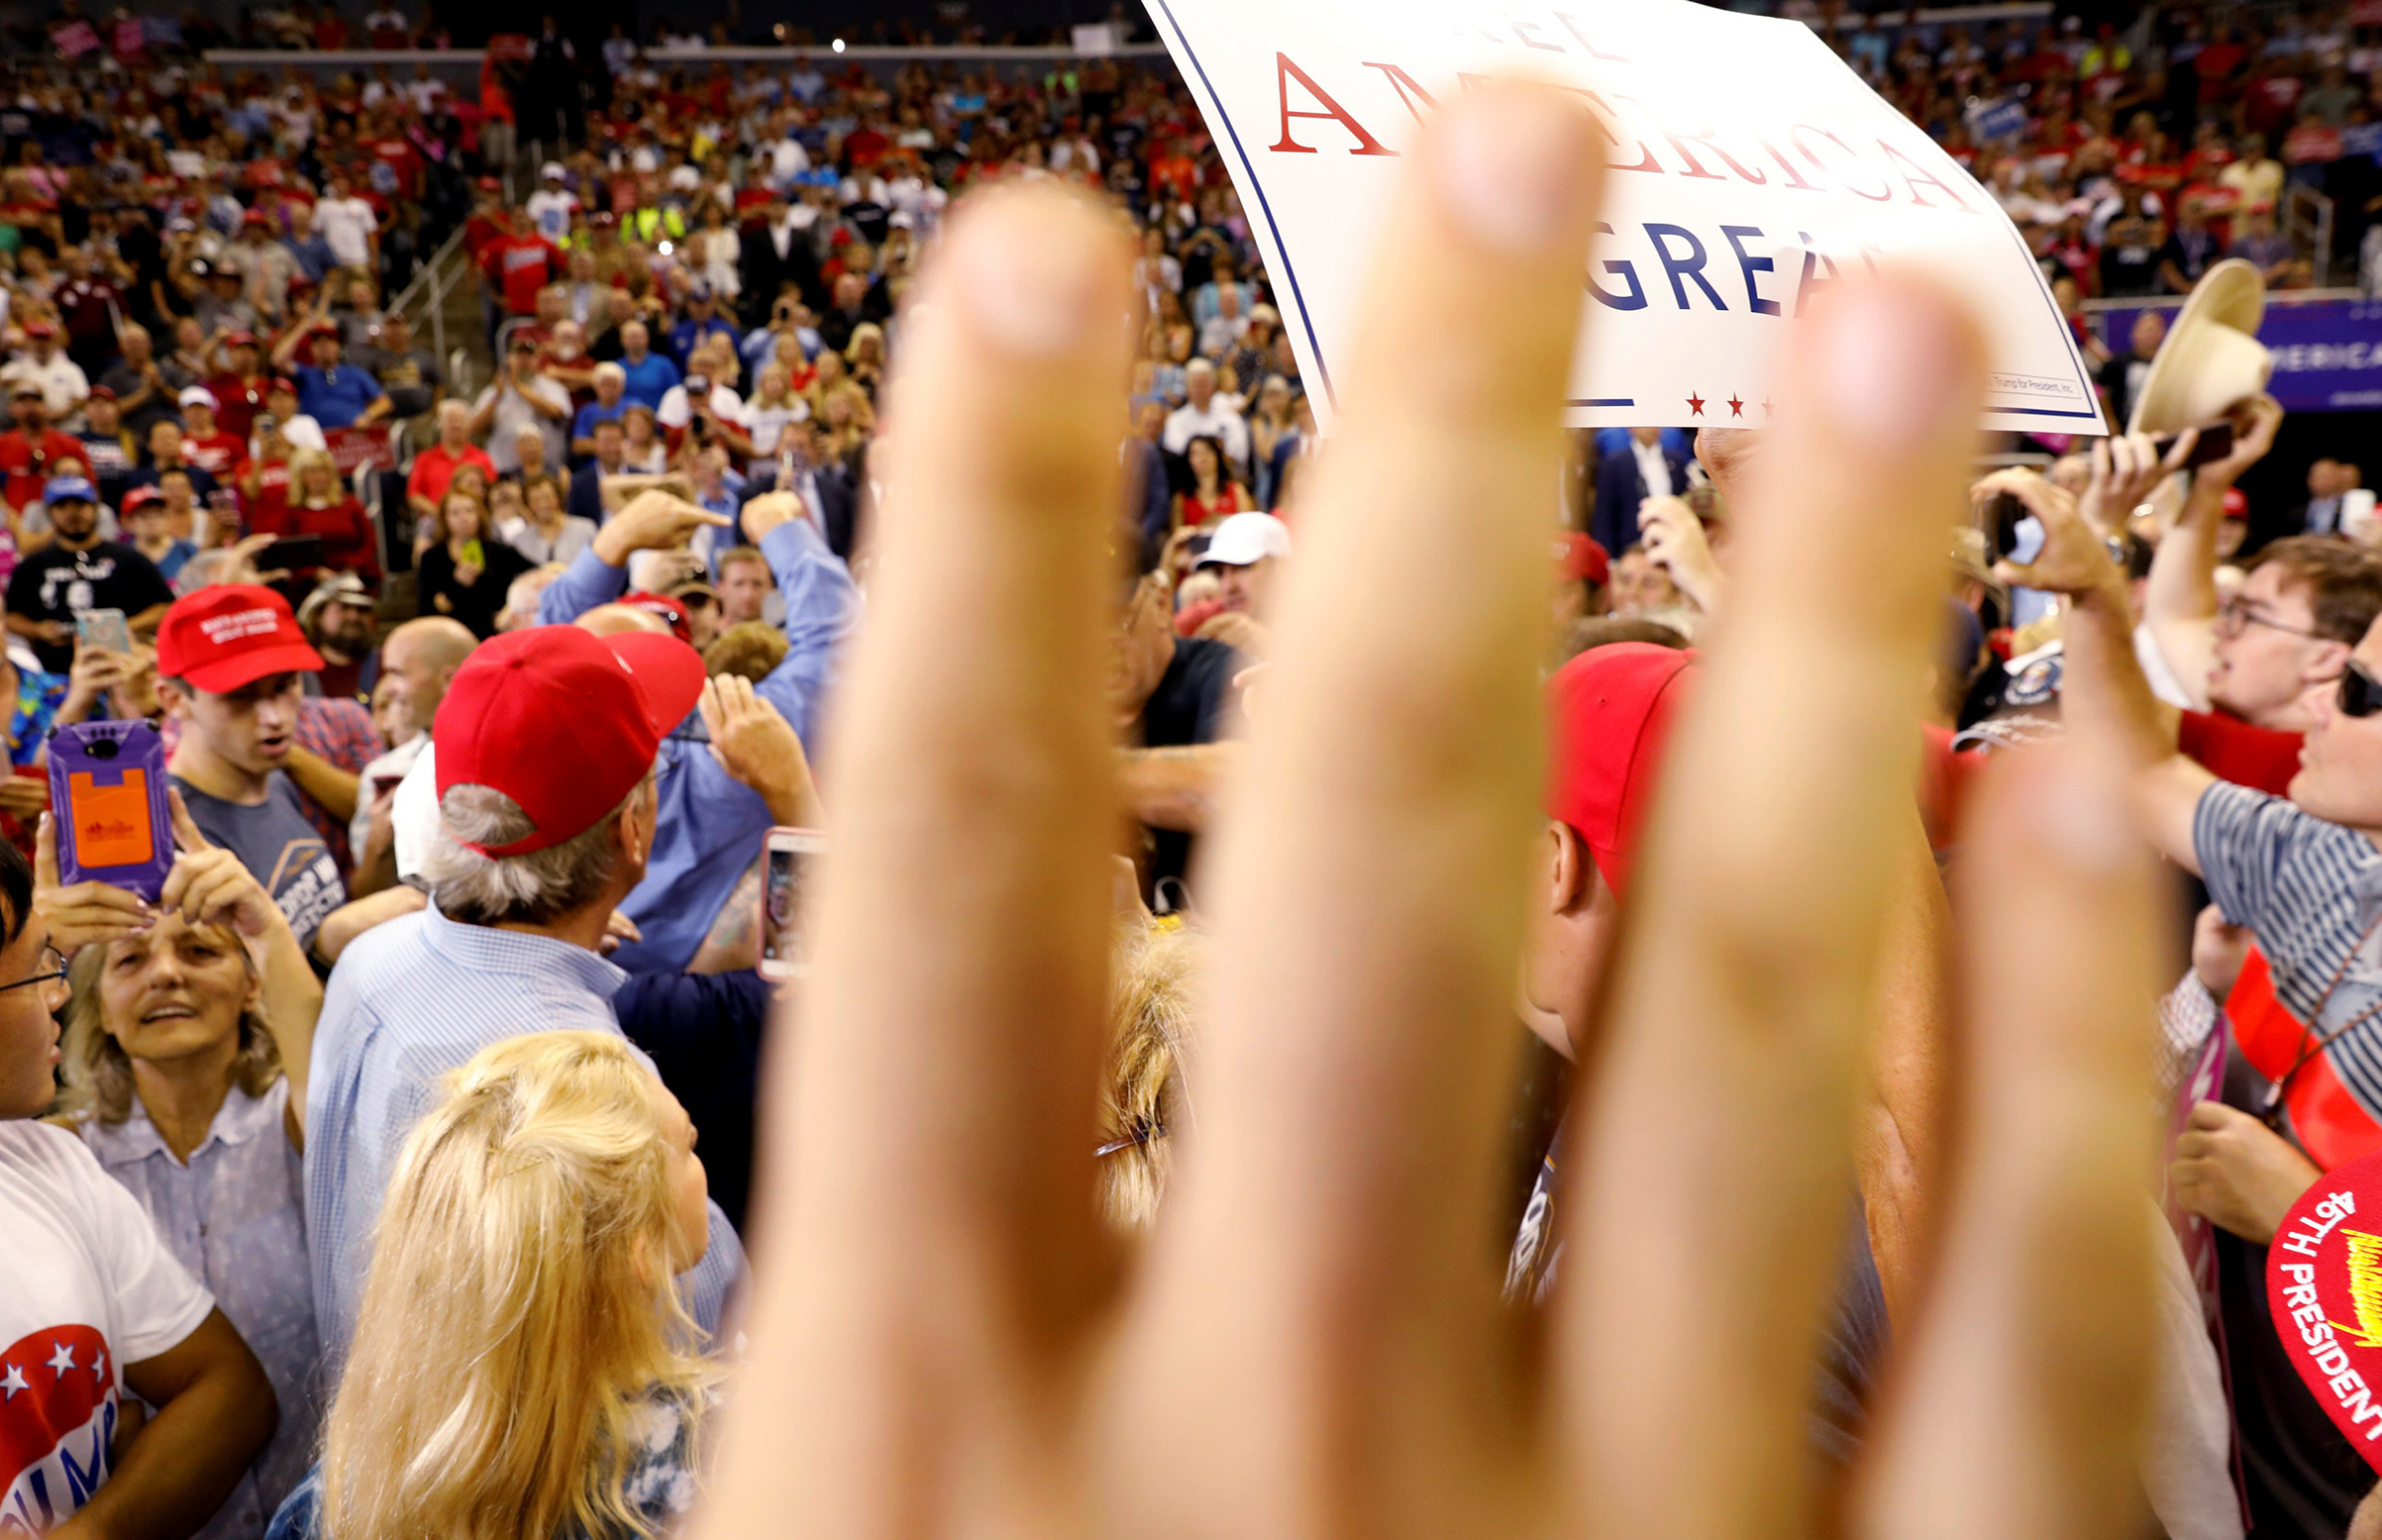 A volunteer for Trump attempts to block the view of protesters a "Make America Great Again" rally in Evansville, Indiana, August 30, 2018. (Kevin Lamarque—Reuters)